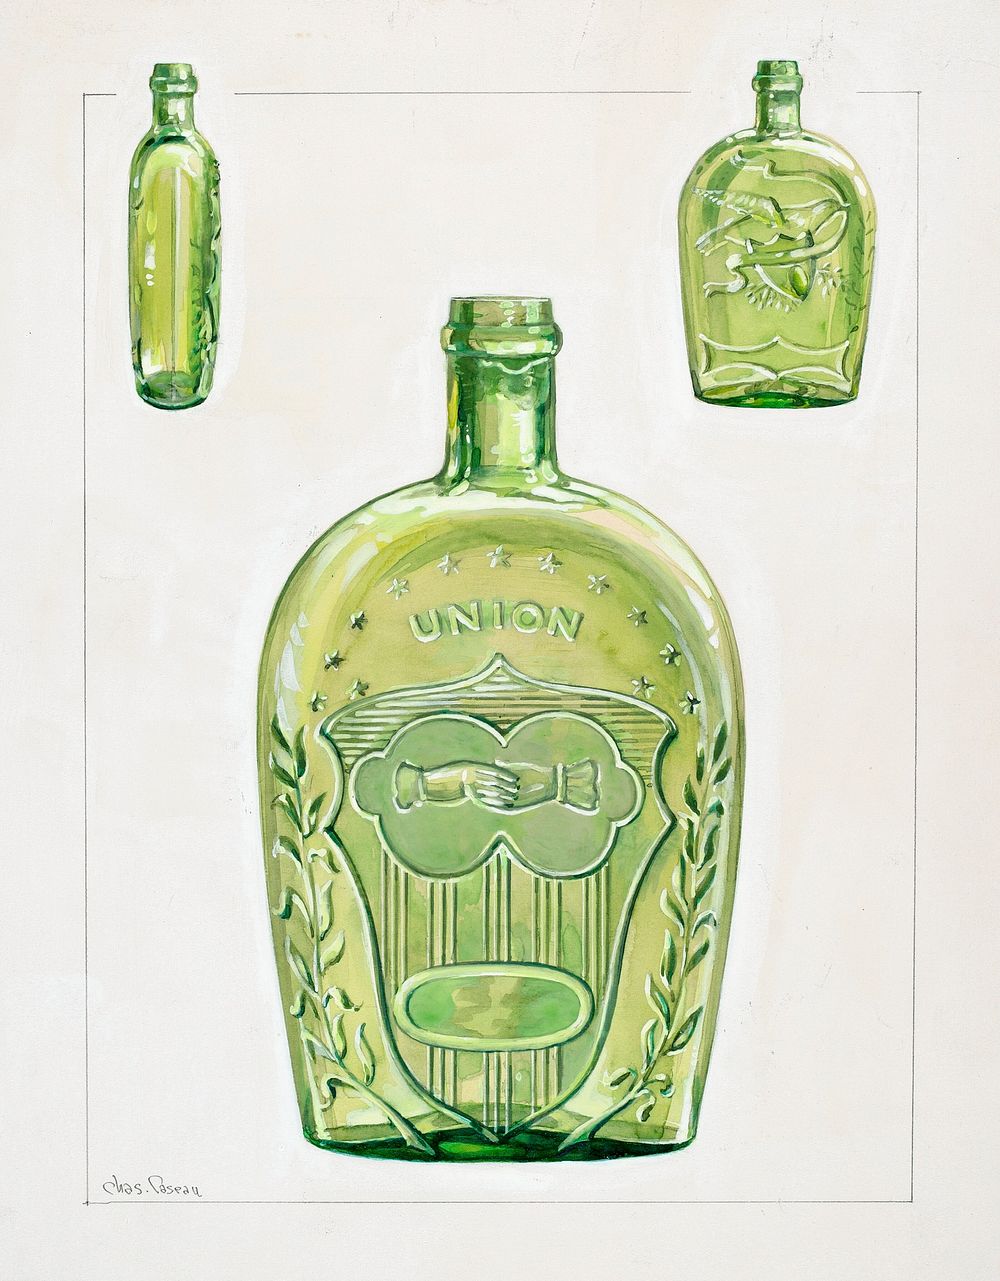 Liquor Flask (ca. 193) by Charles Caseau. Original from The National Gallery of Art. Digitally enhanced by rawpixel.